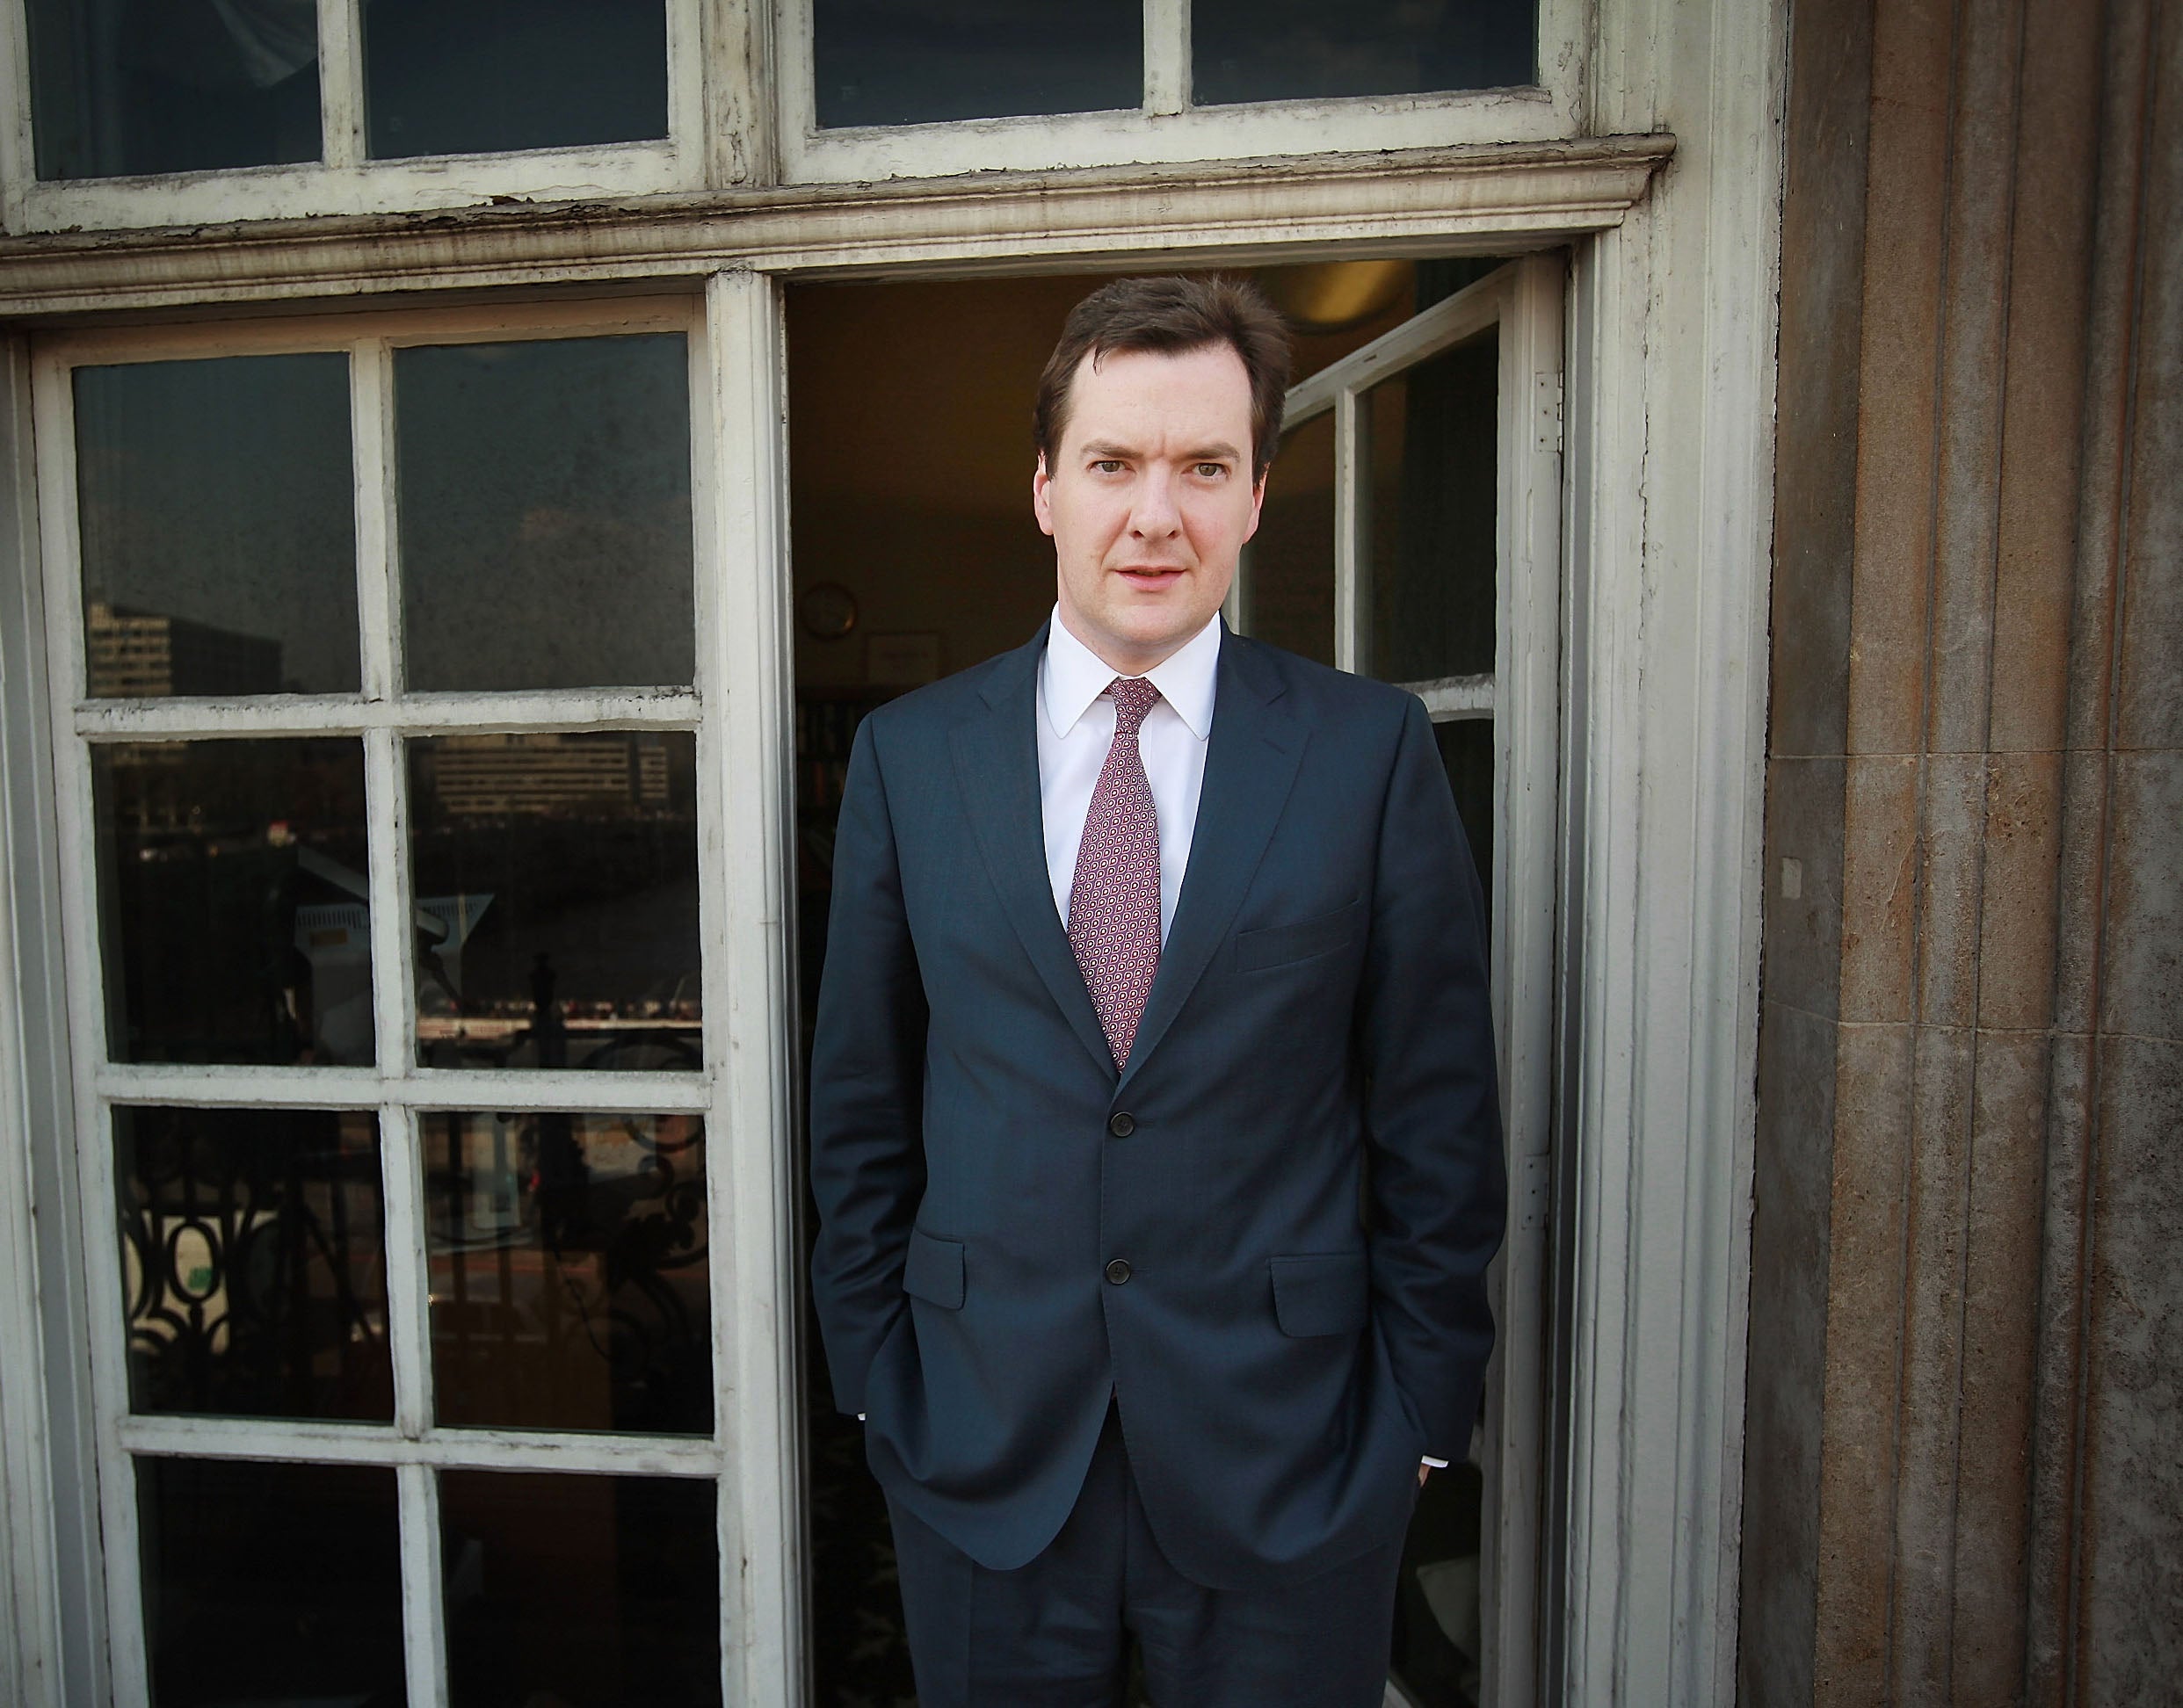 UK Chancellor George Osborne is looking to sell up to £5 billion of corporate and financial assets by March 2020, to help reduce the nation’s deficit